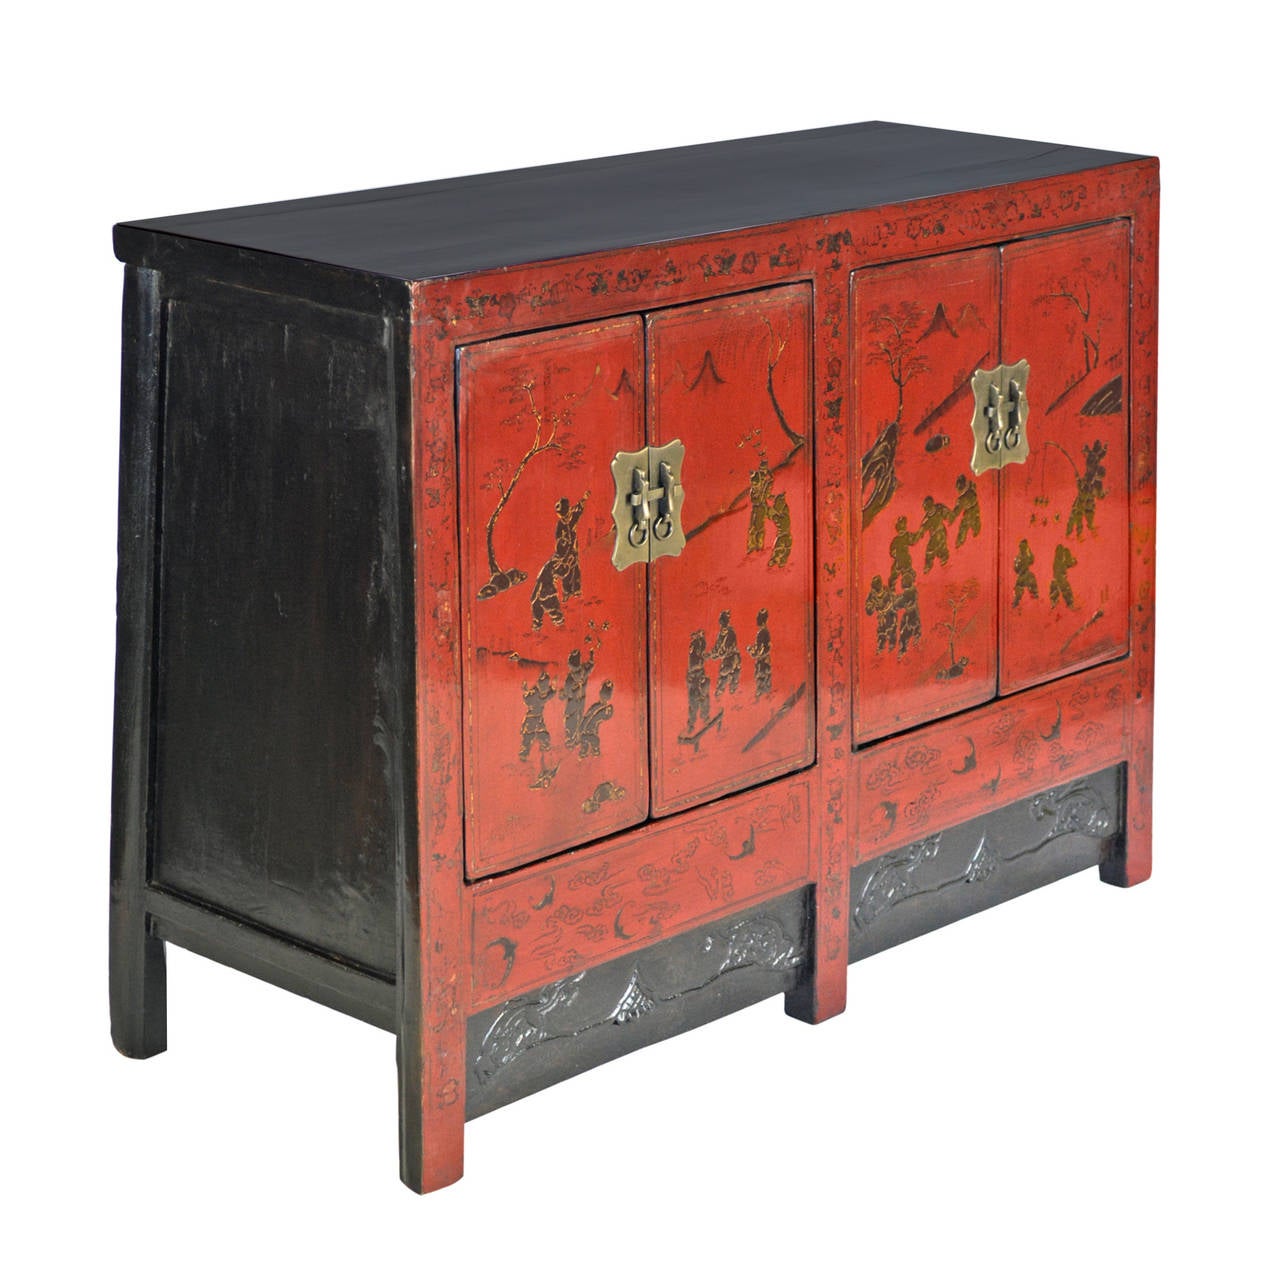 This square corner Linden wood sideboard is lacquered with red and black finishes. The doors are painted with figures of little boys symbolizing fertility. The apron is has a black lacquer finish creating a contrast in color.